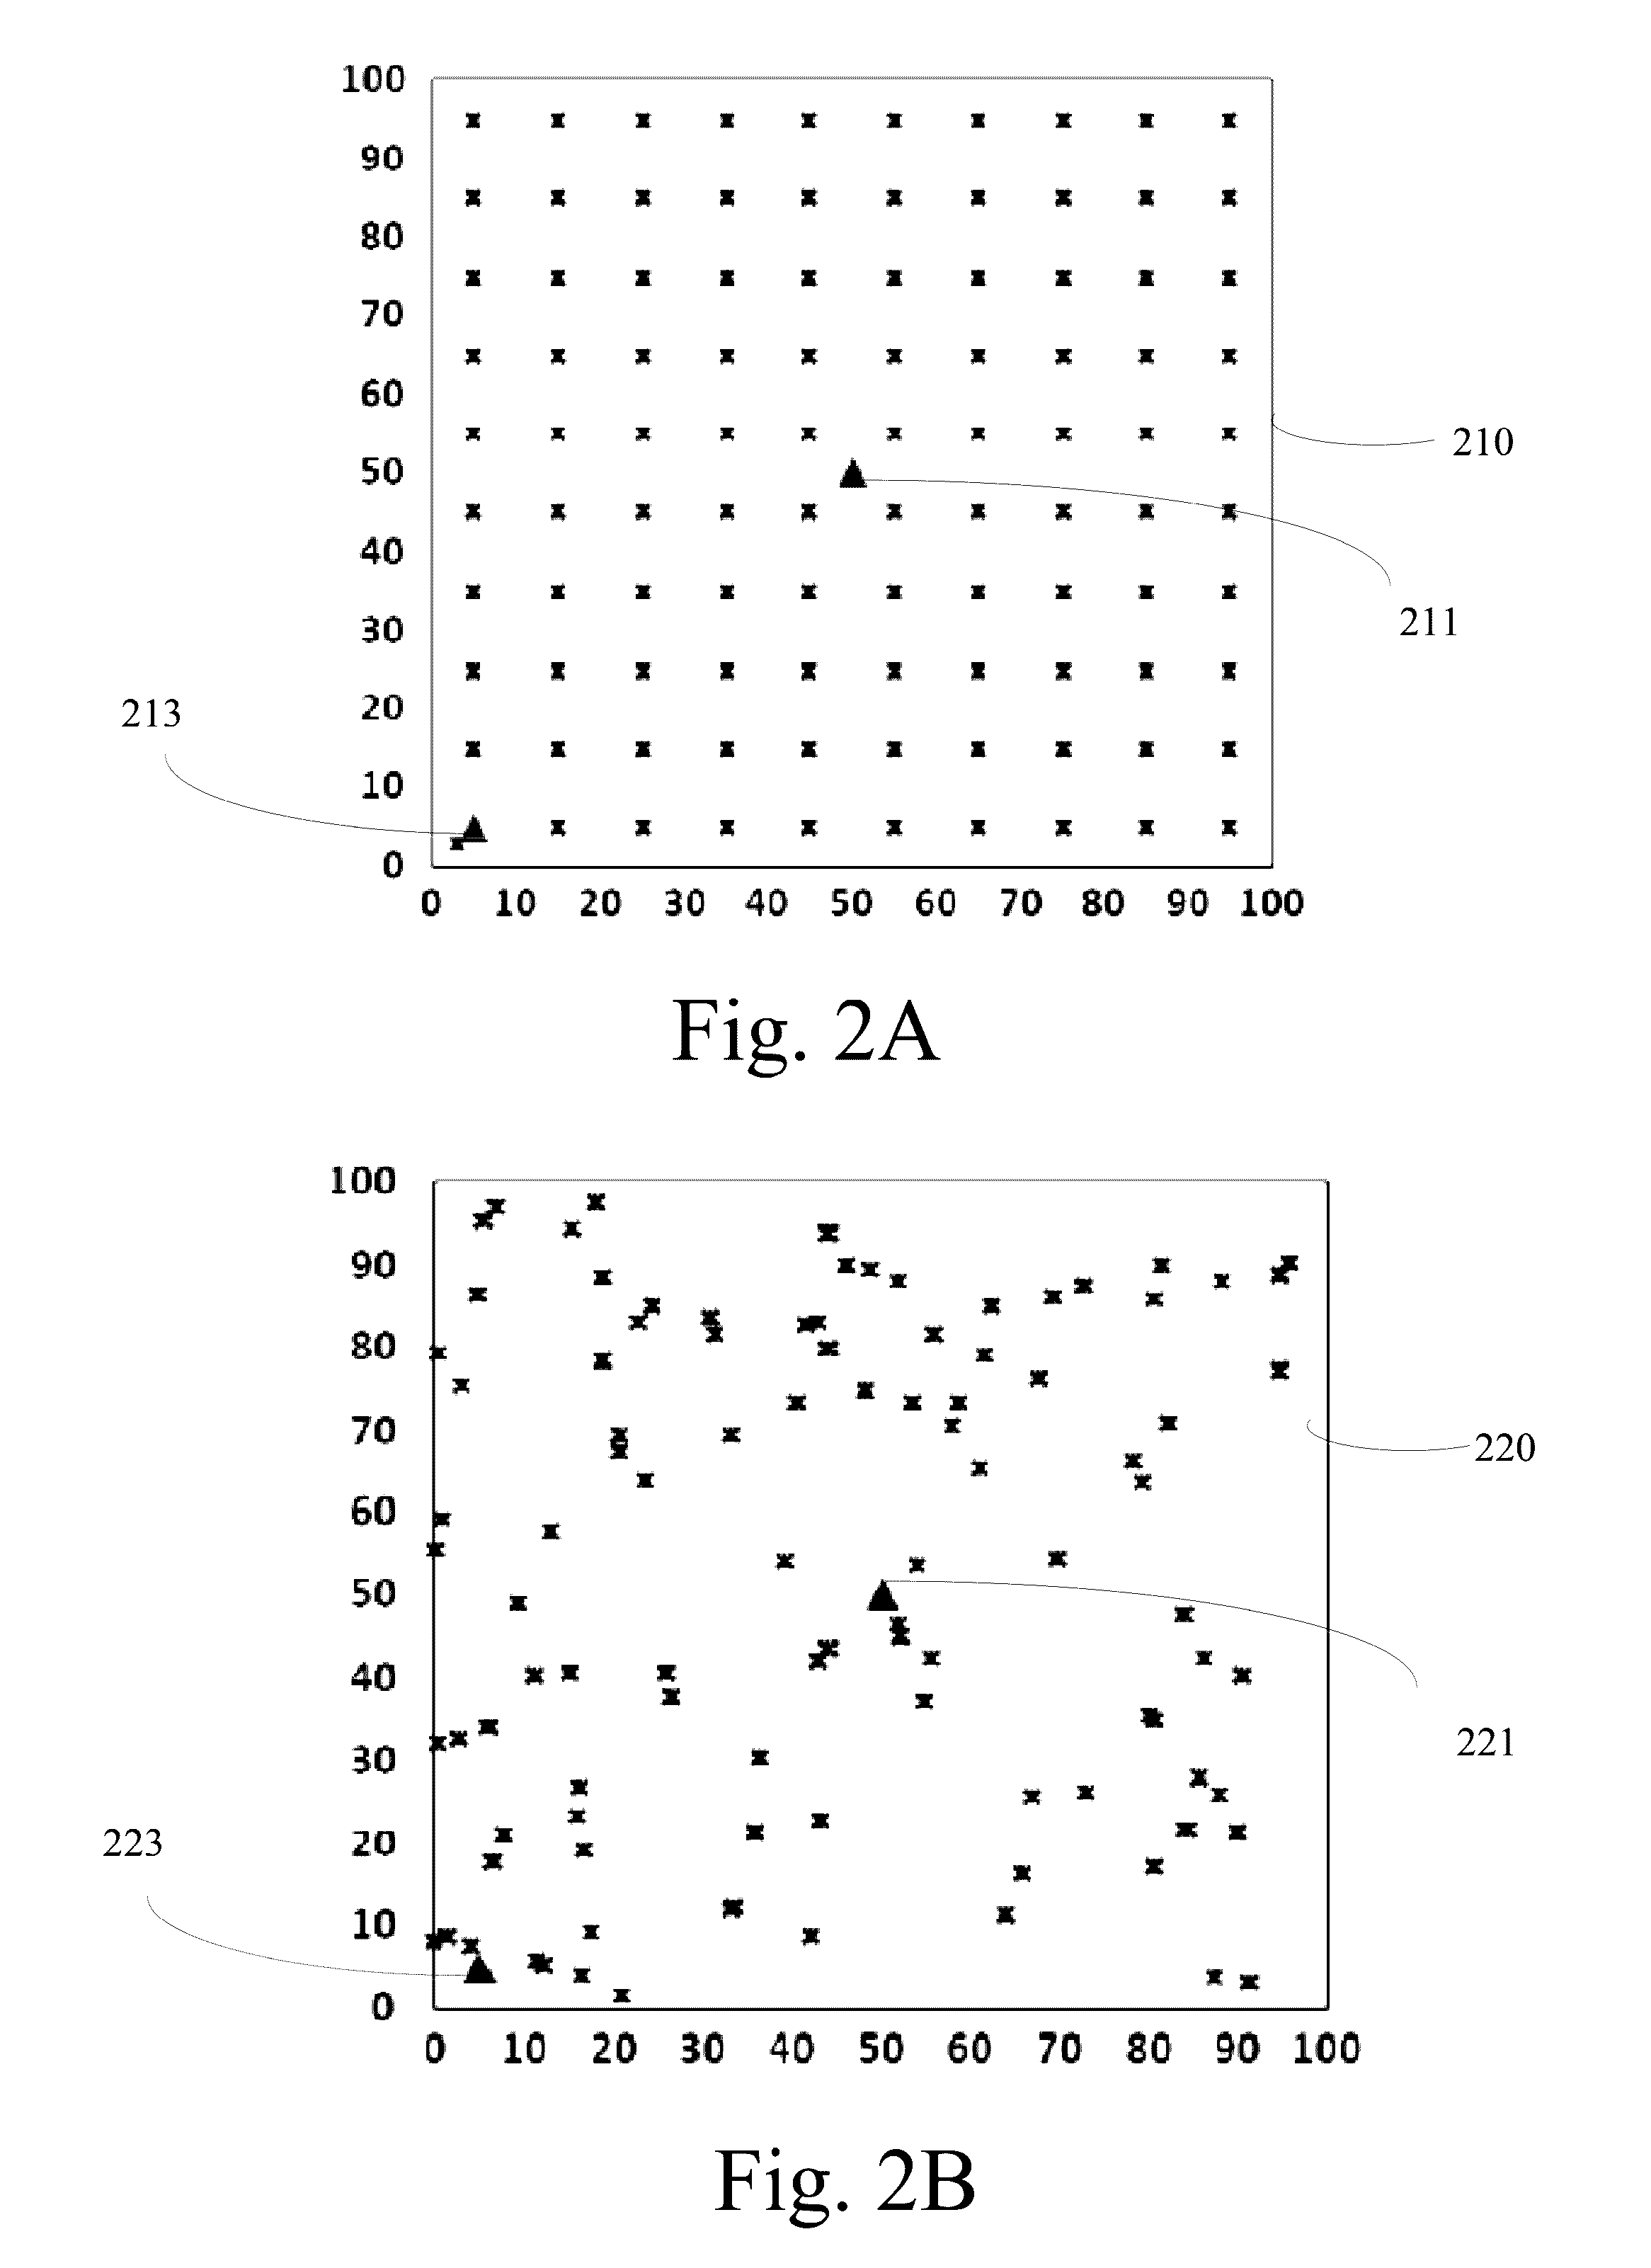 Apparatus and method for evaluating wireless sensor networks